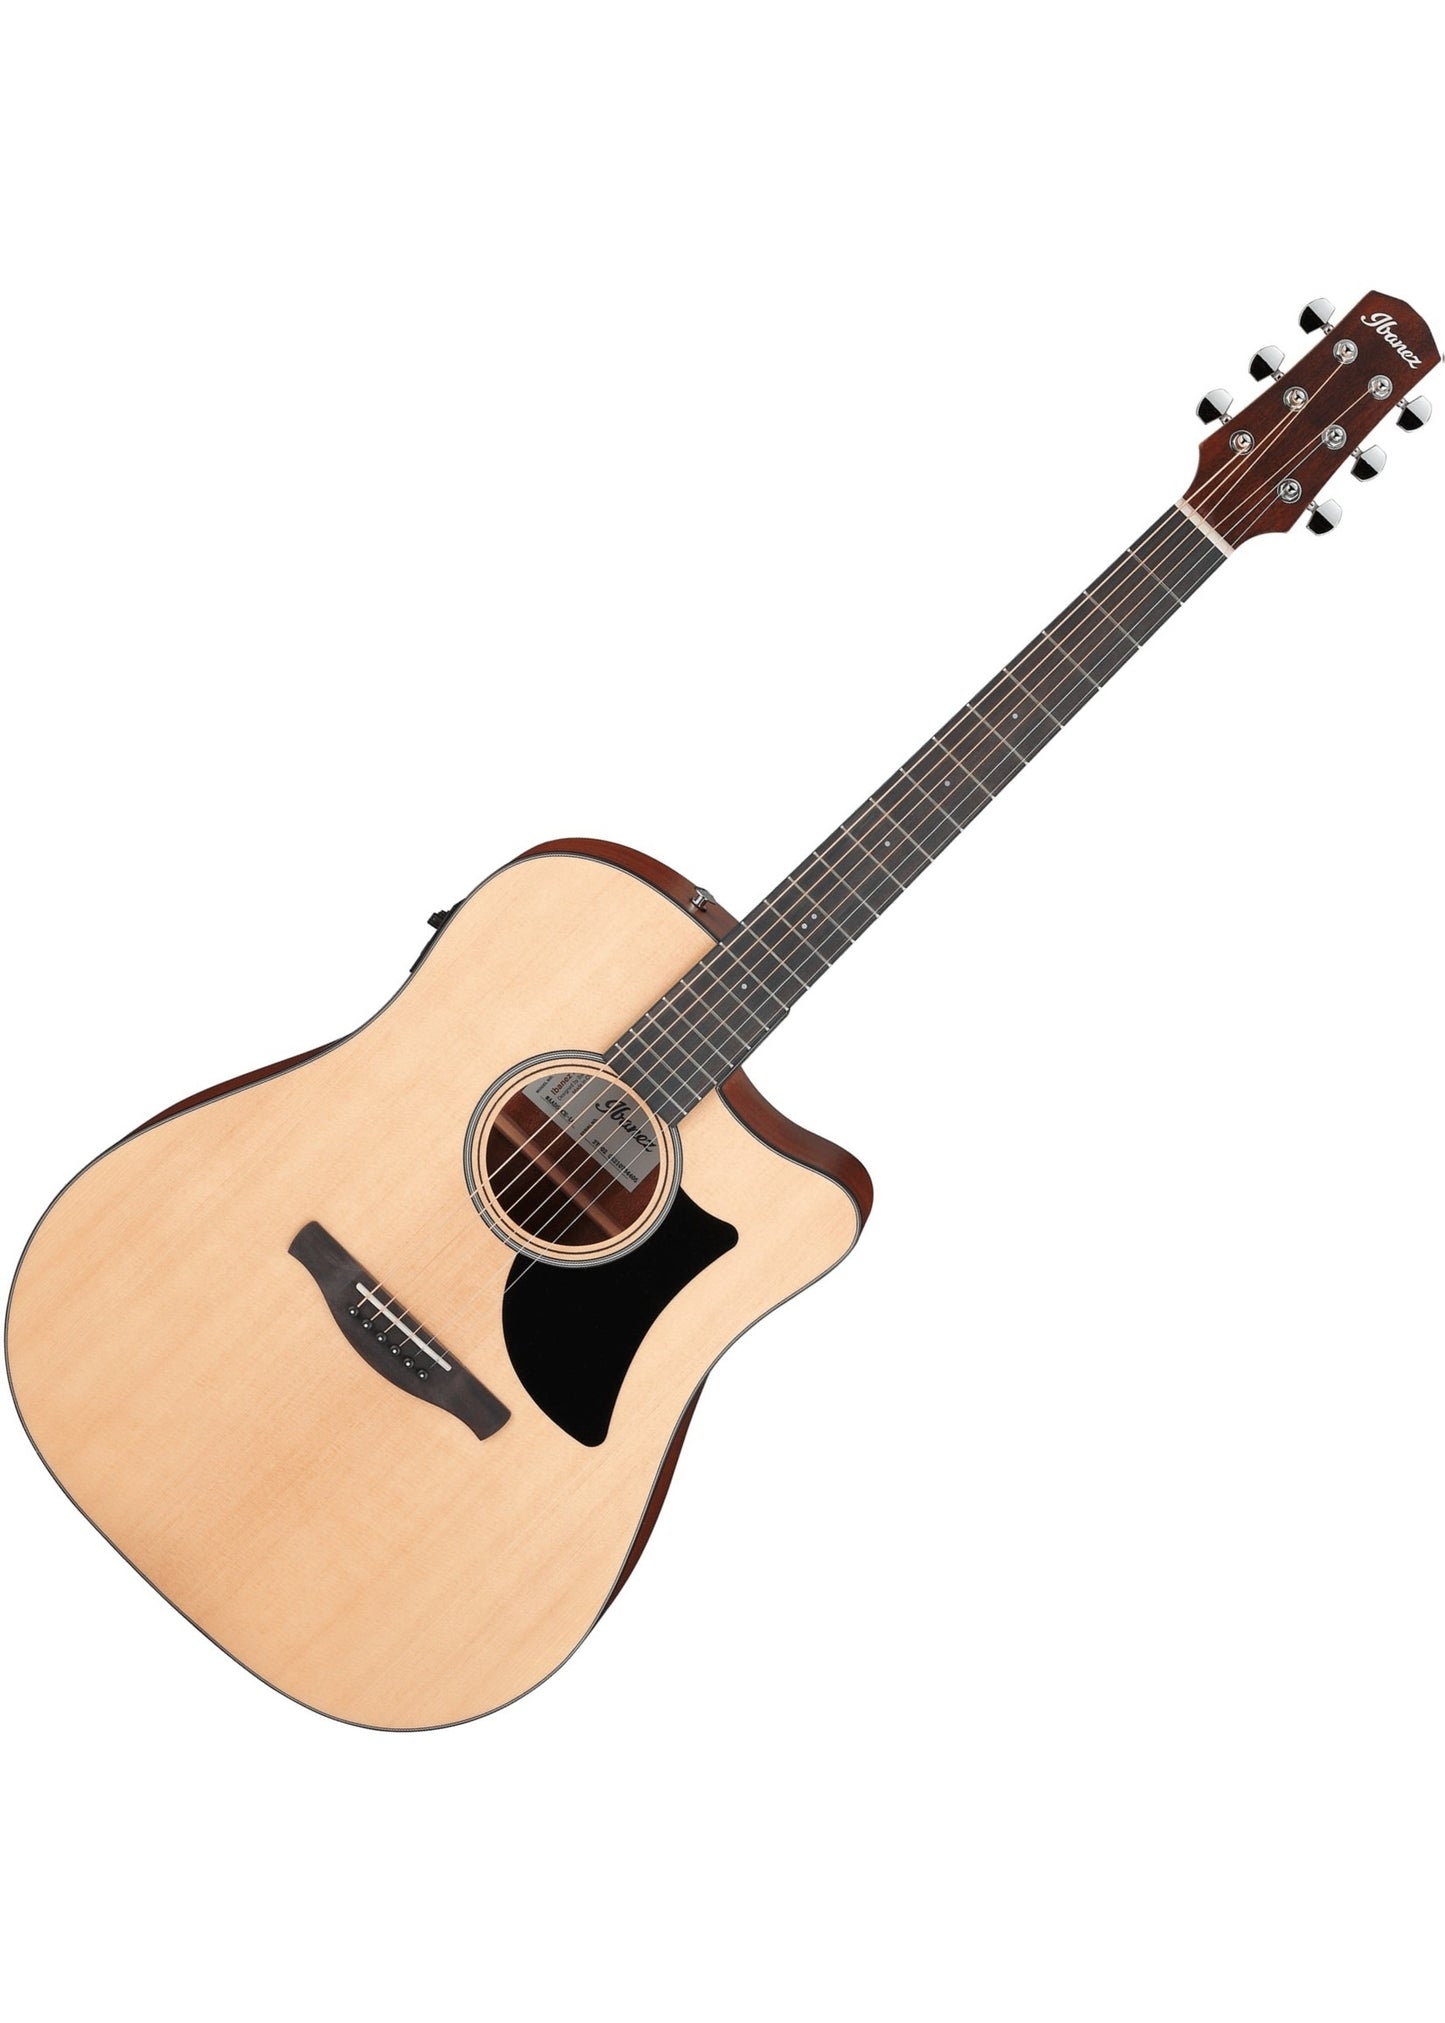 Ibanez AAD50CE Advanced Acoustic-electric Guitar